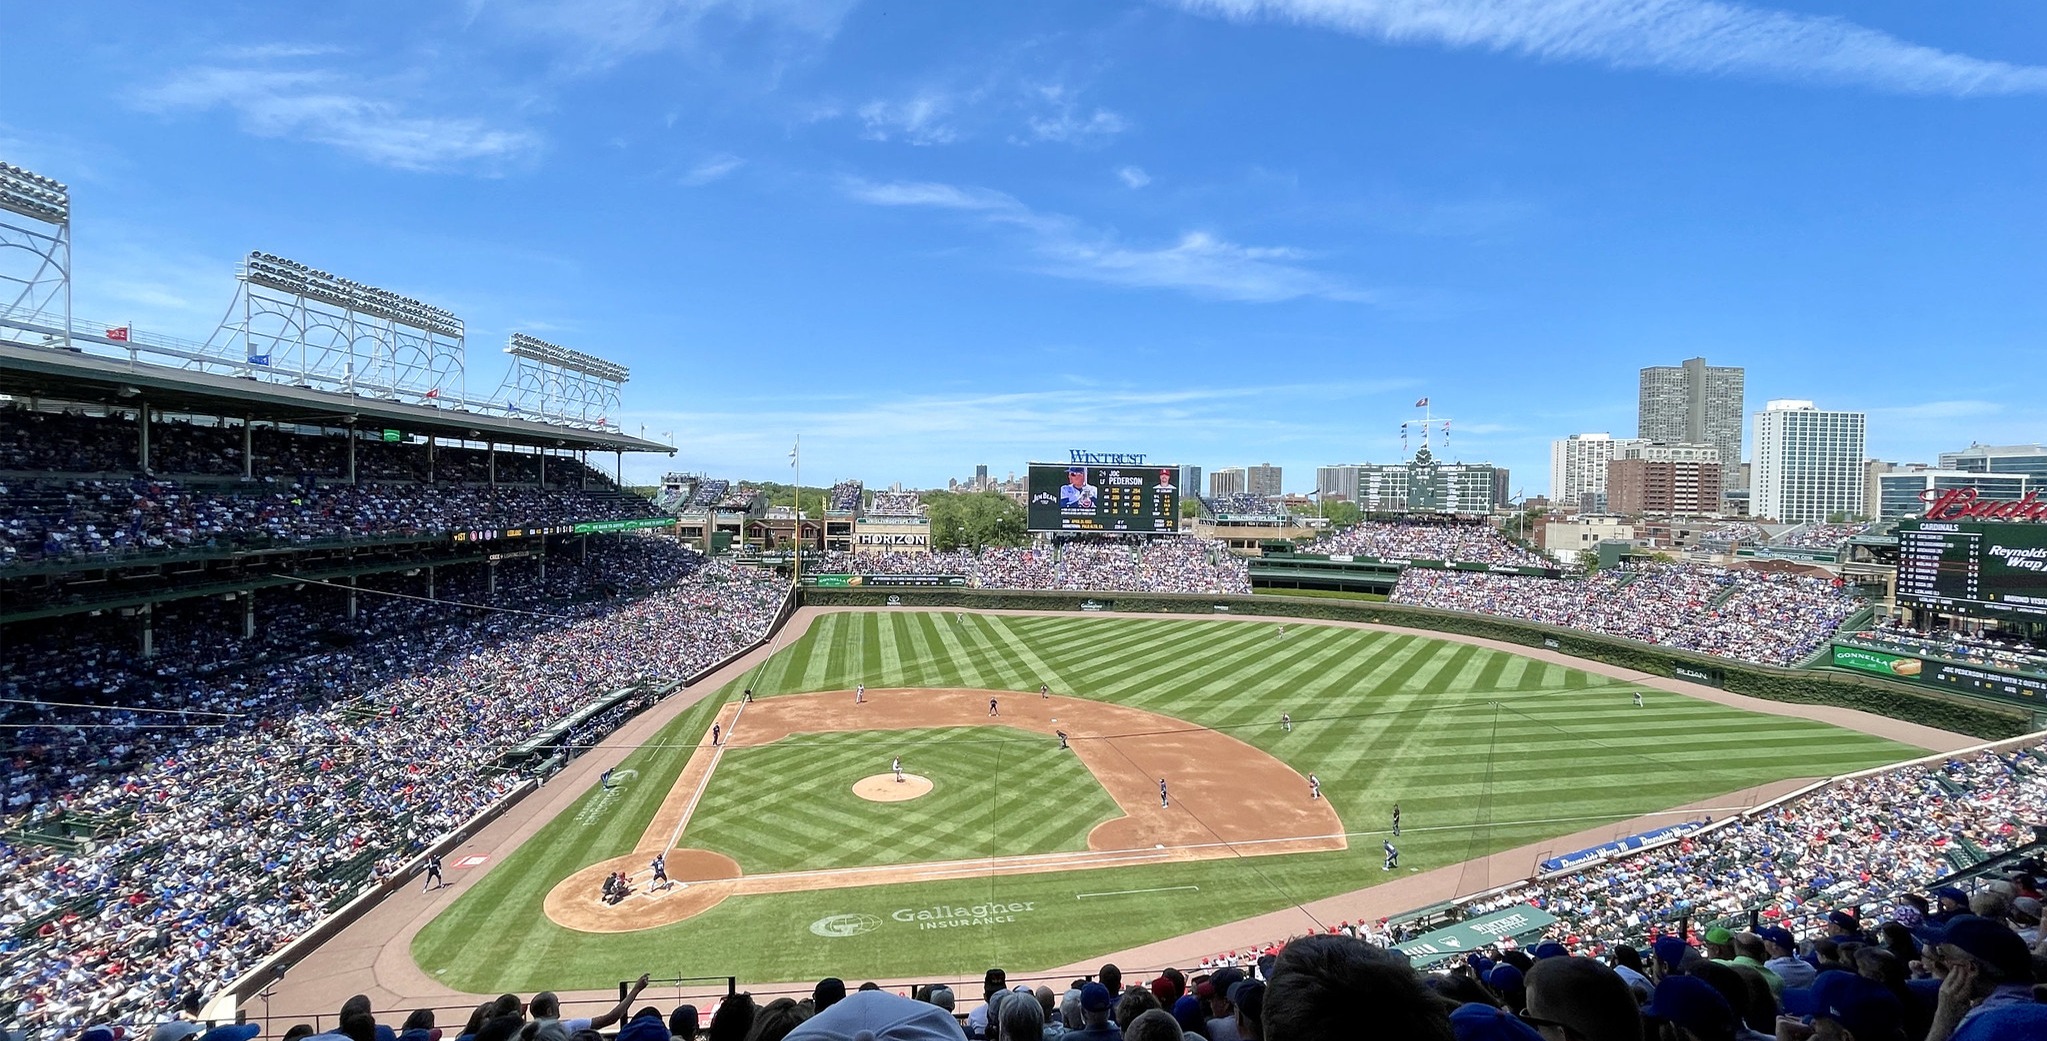 View from the upper deck at Wrigley Field